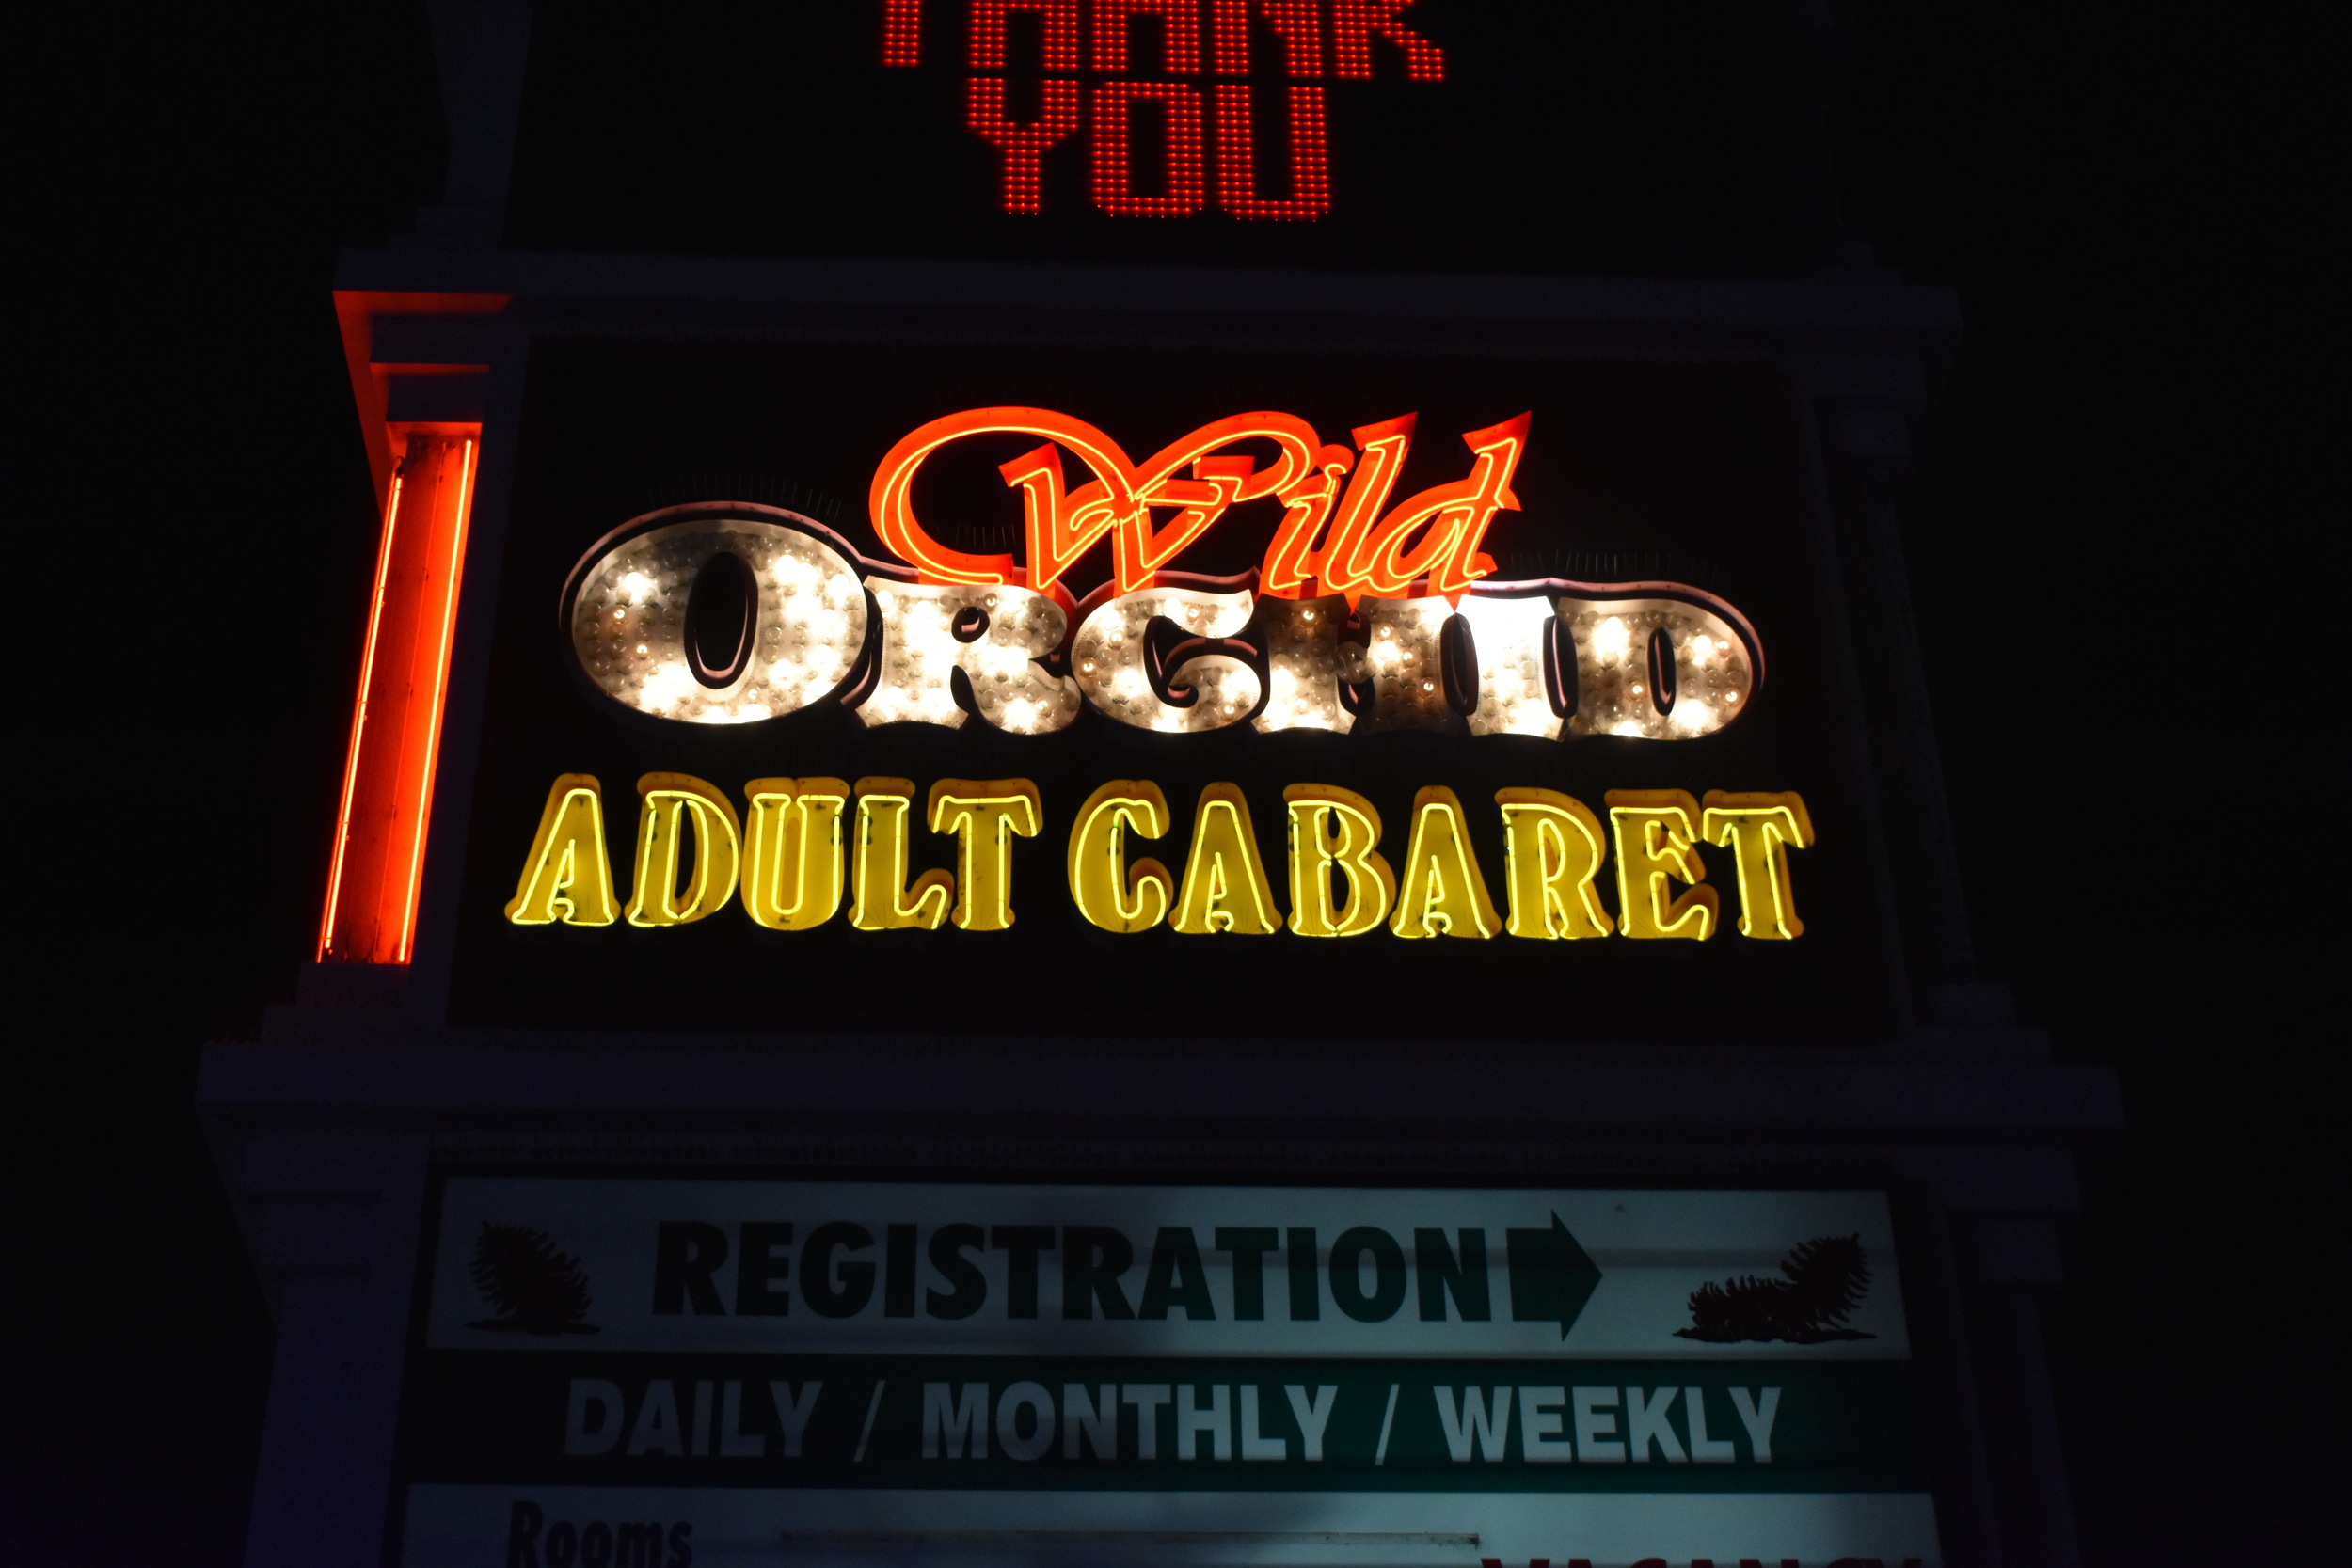 Wild Orchid Adult Cabaret double mounted sign, Reno, Nevada